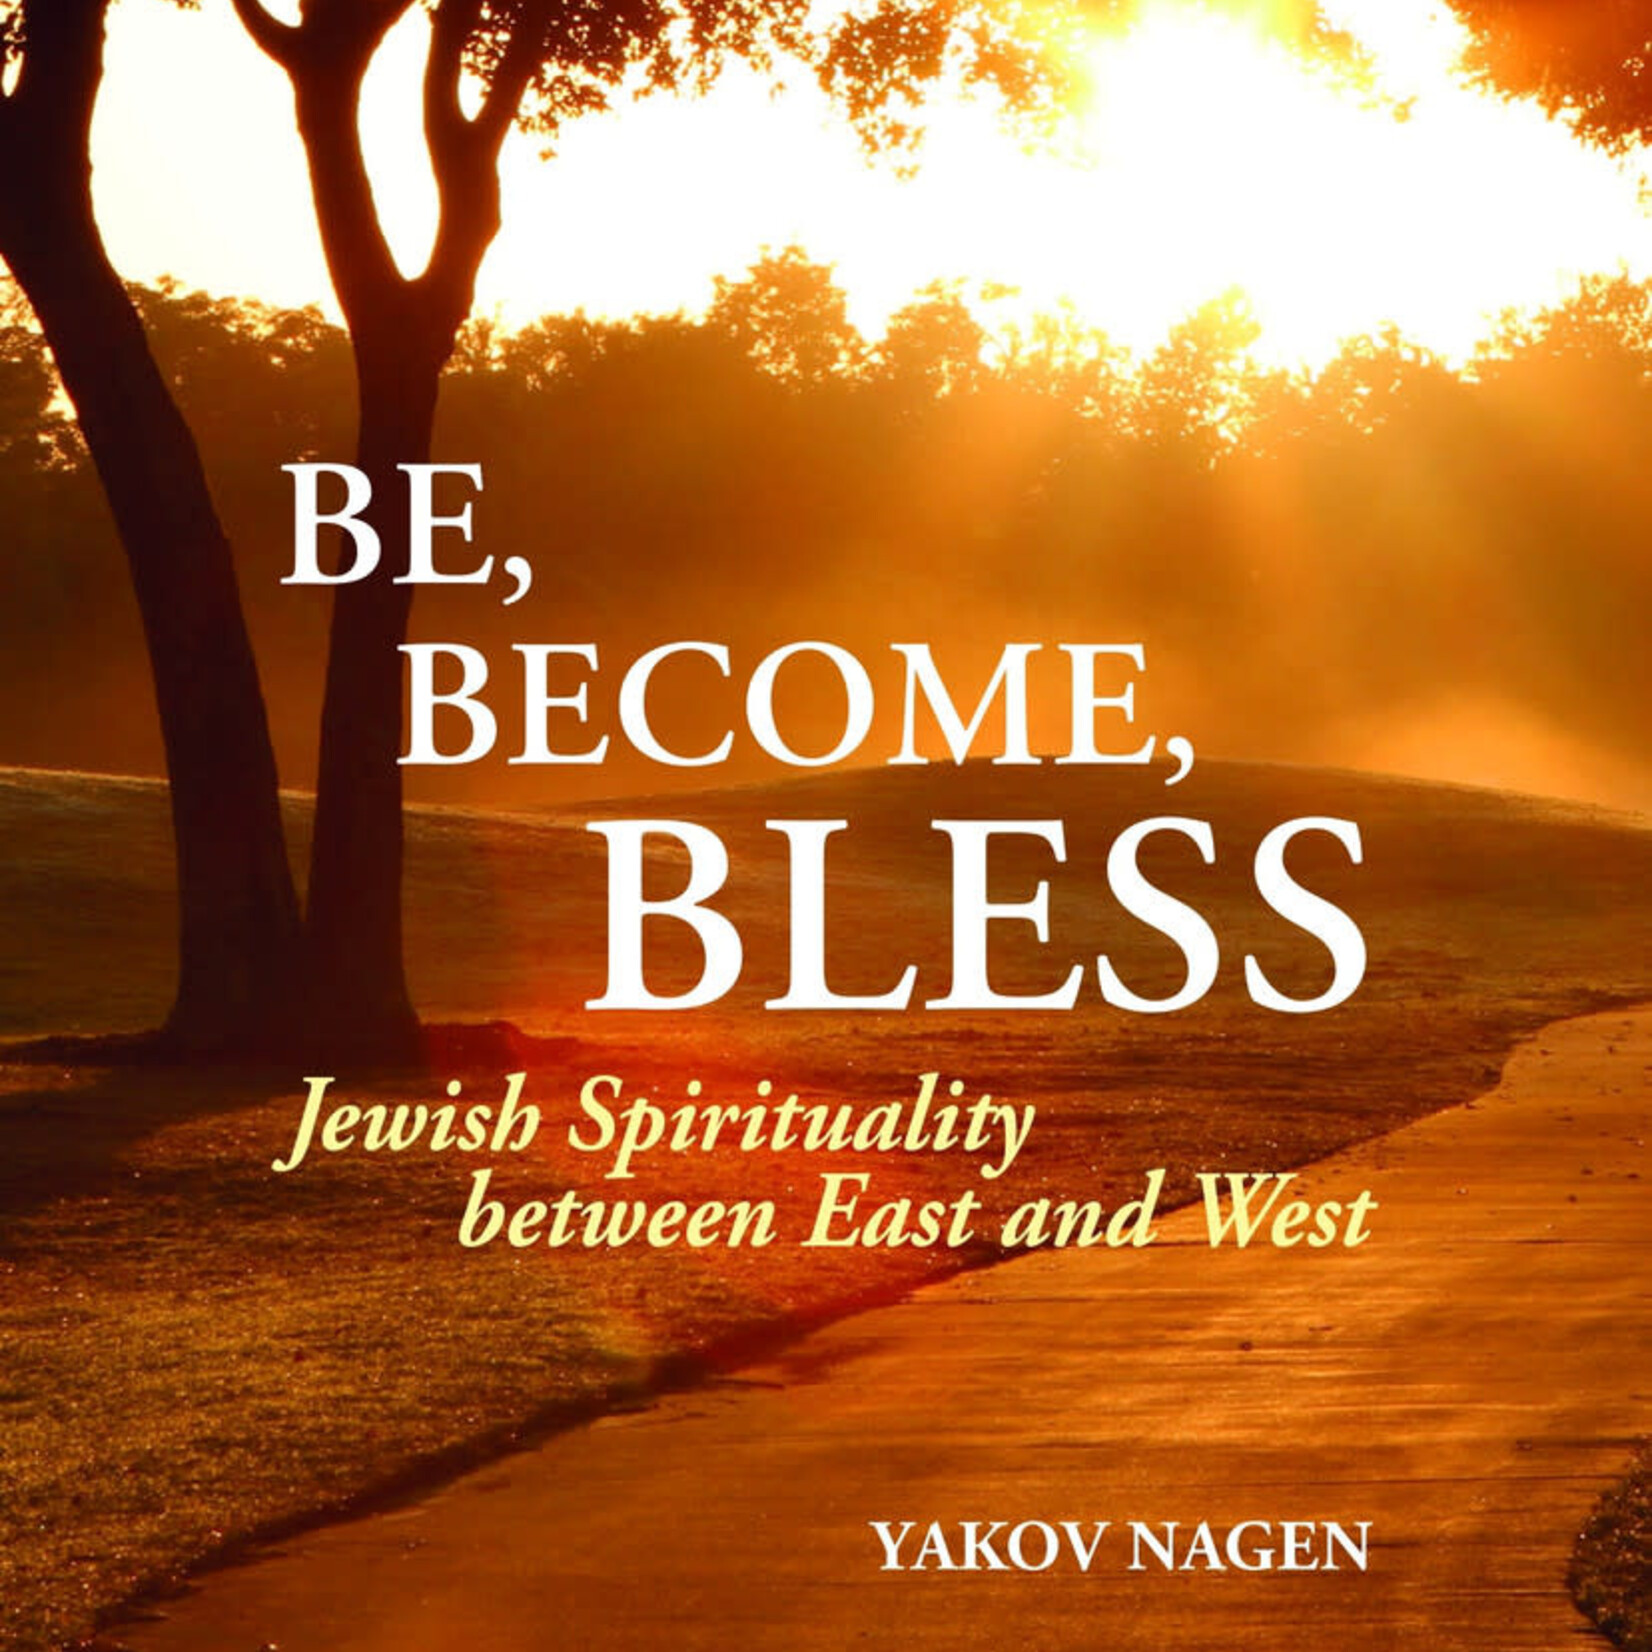 Be, Become, Bless by Rabbi Yaakov Nagen